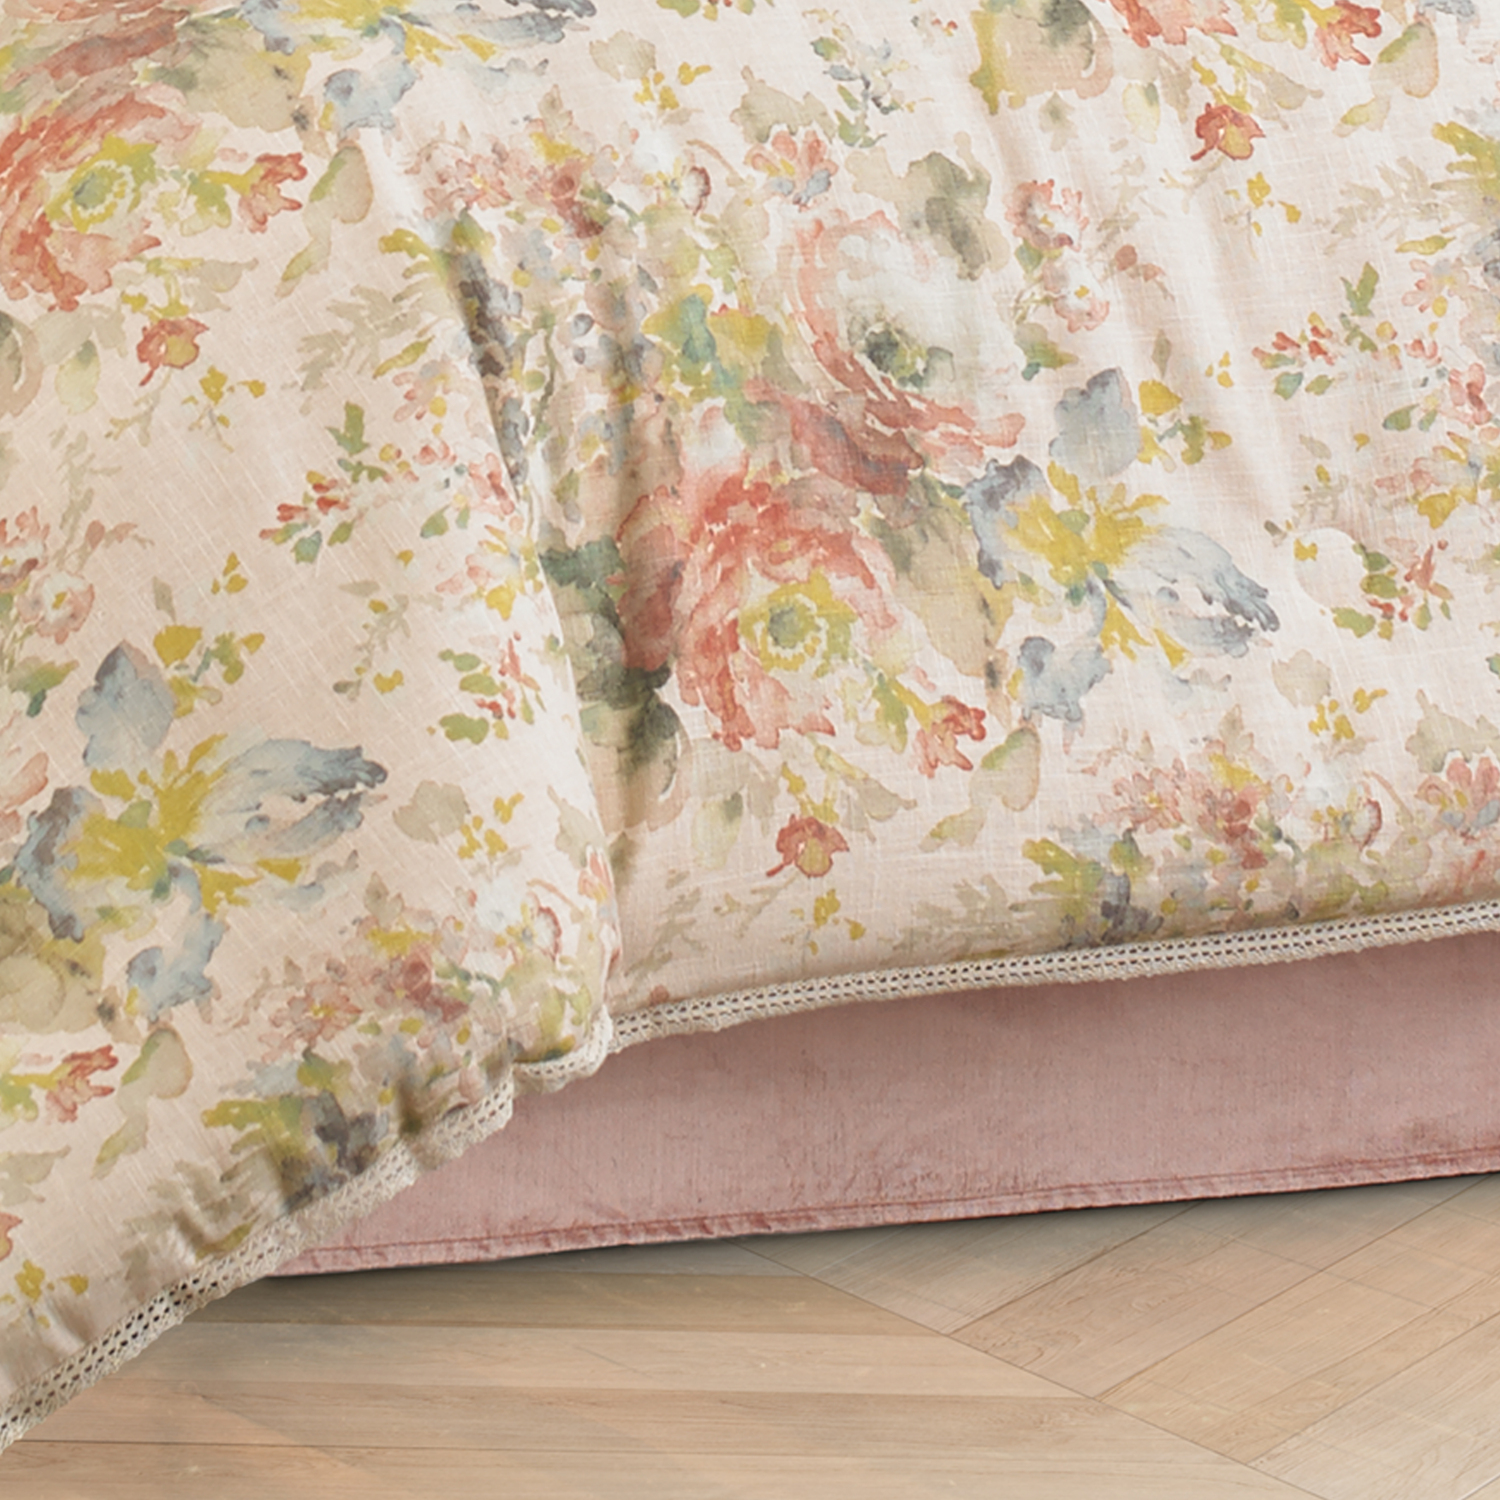 J. Queen New York Floral Park Blush Bedding Collection